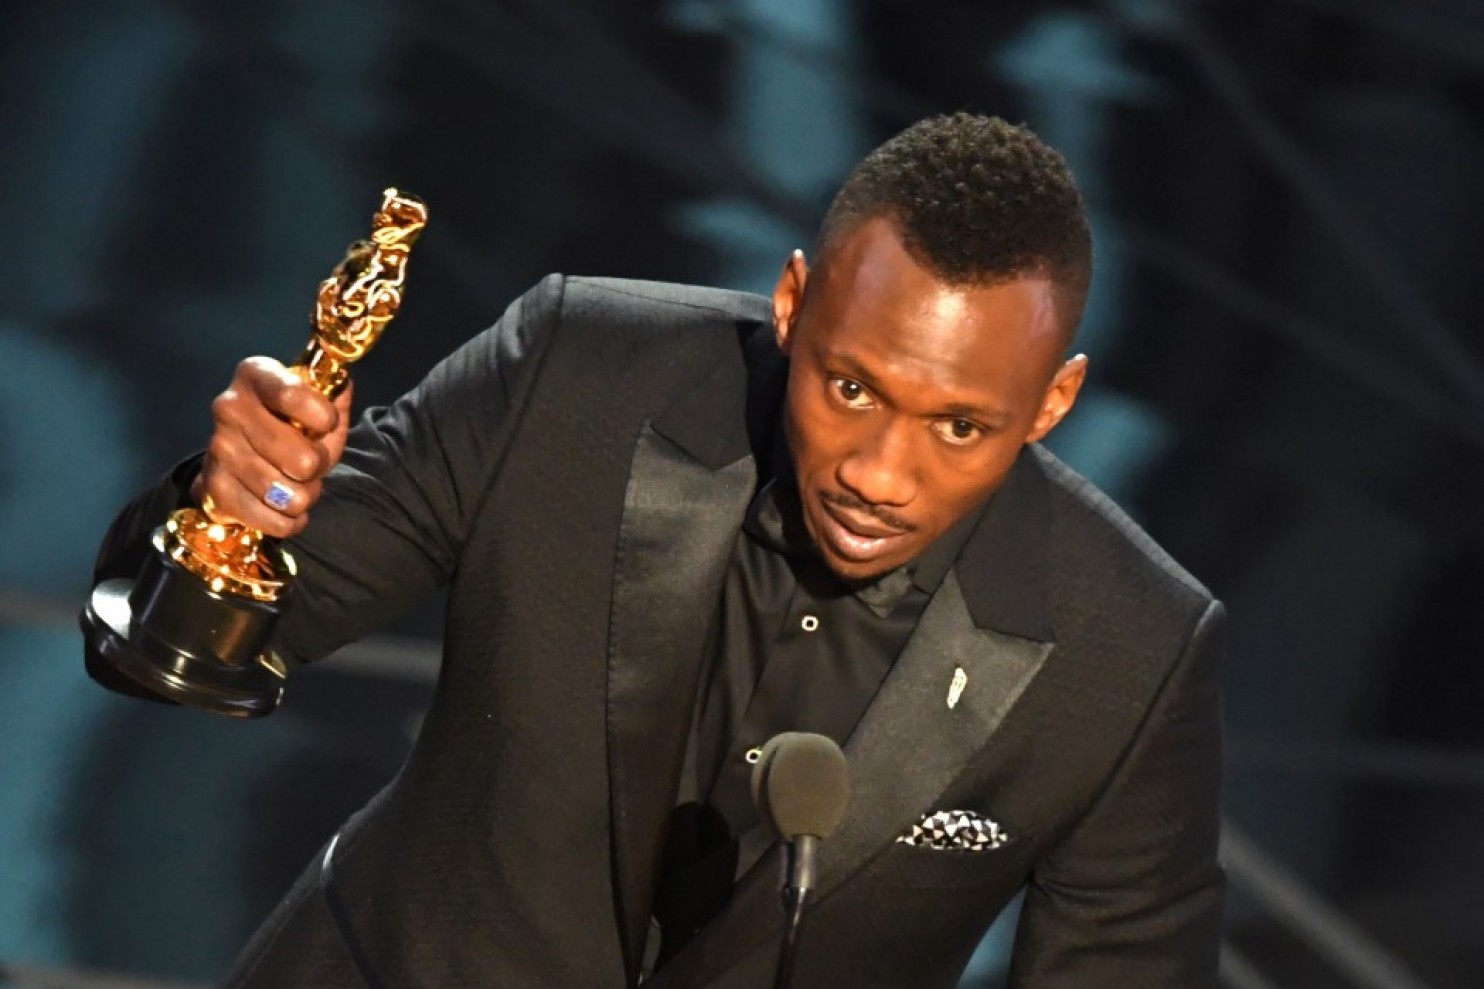  ‘I just feel blessed’: Mahershala Ali becomes first Muslim actor to win an Oscar